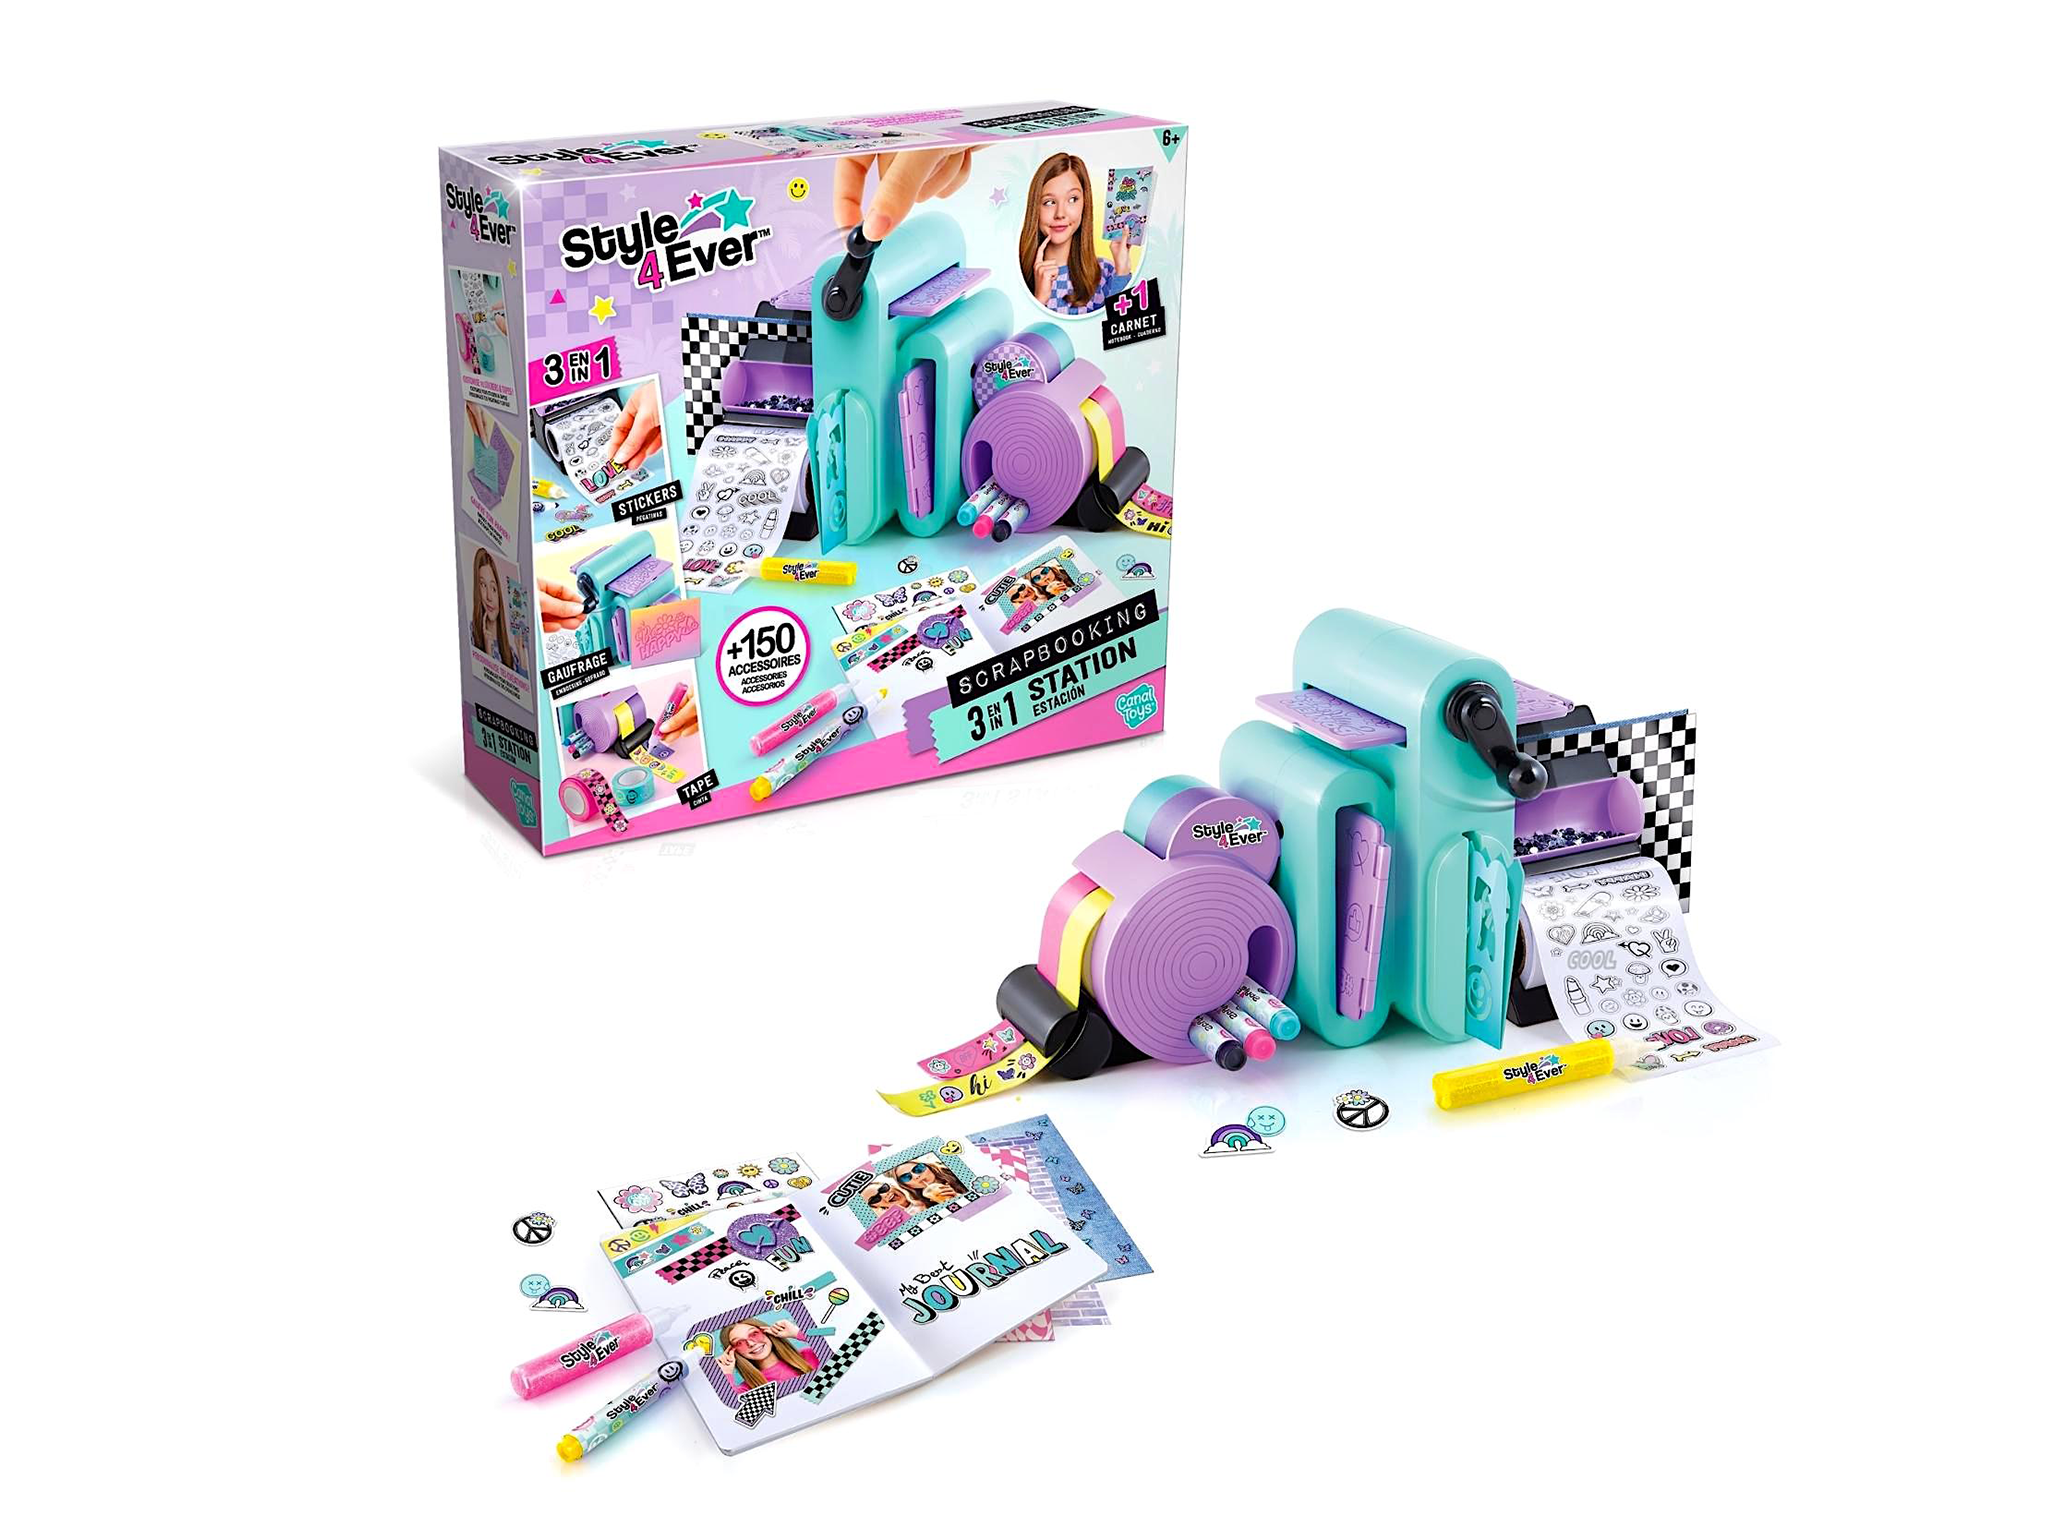 Style 4 Ever 3-in-1 scrapbooking station